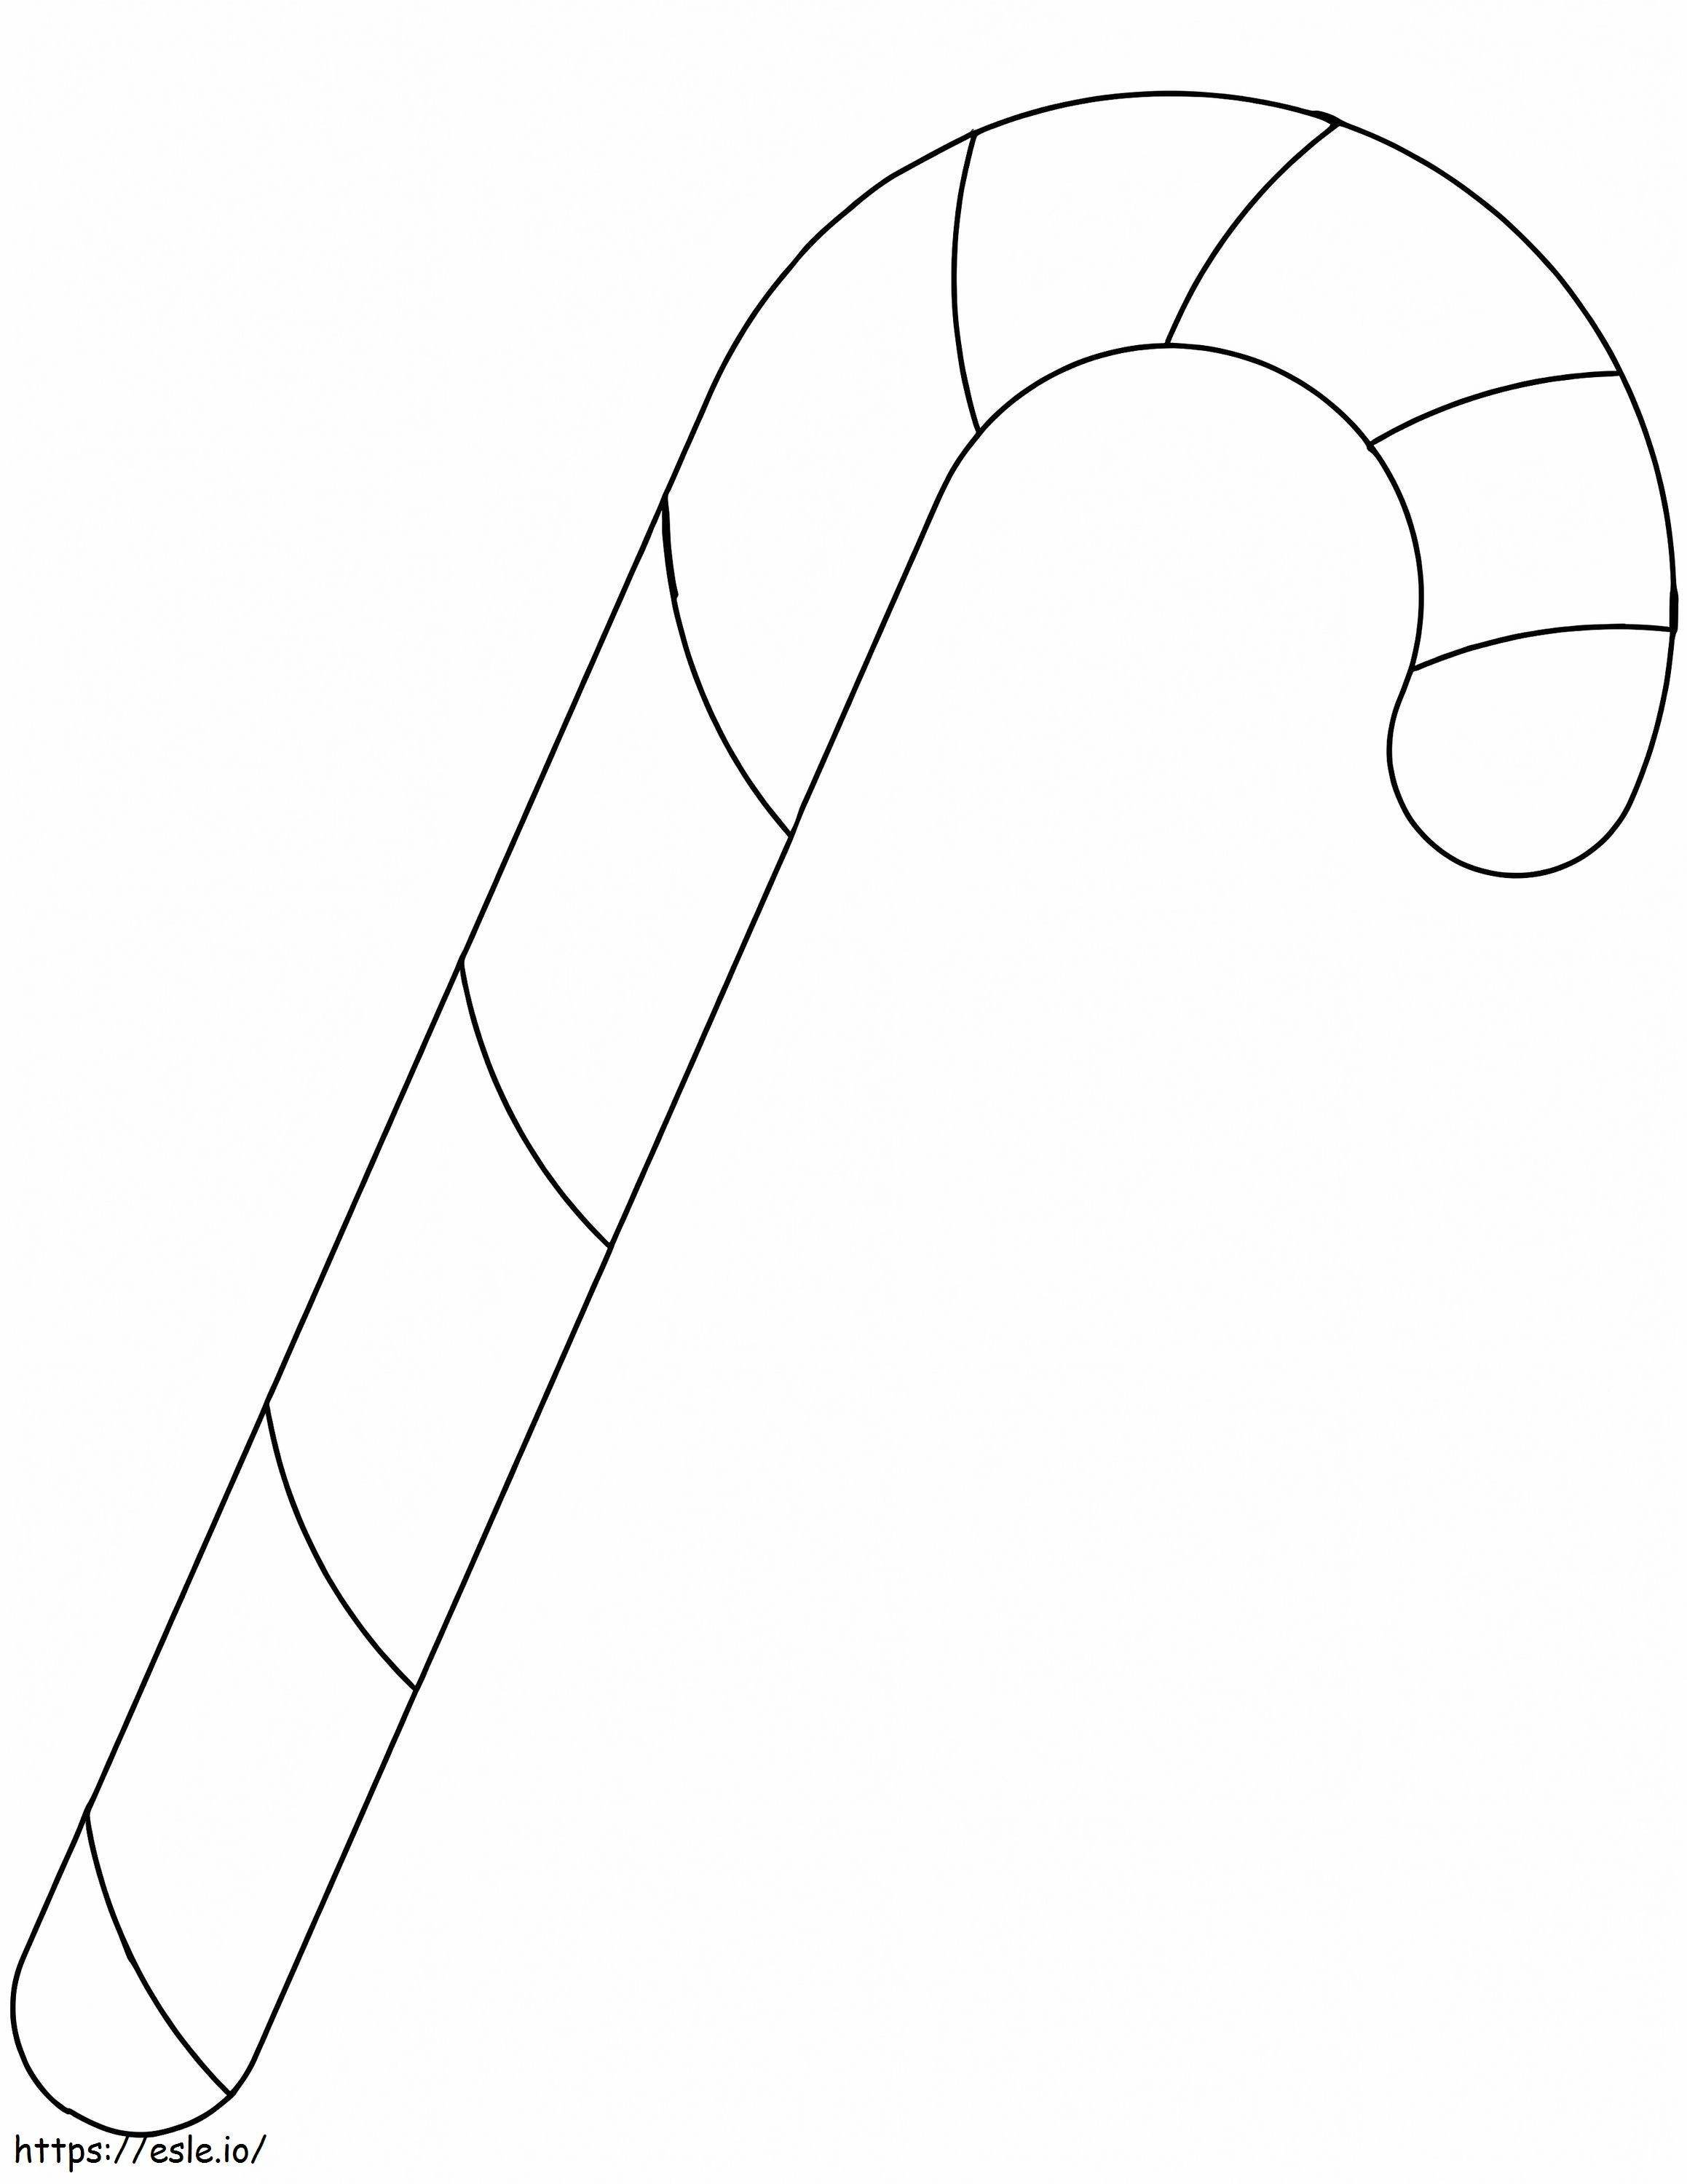 Candy Cane 1 coloring page